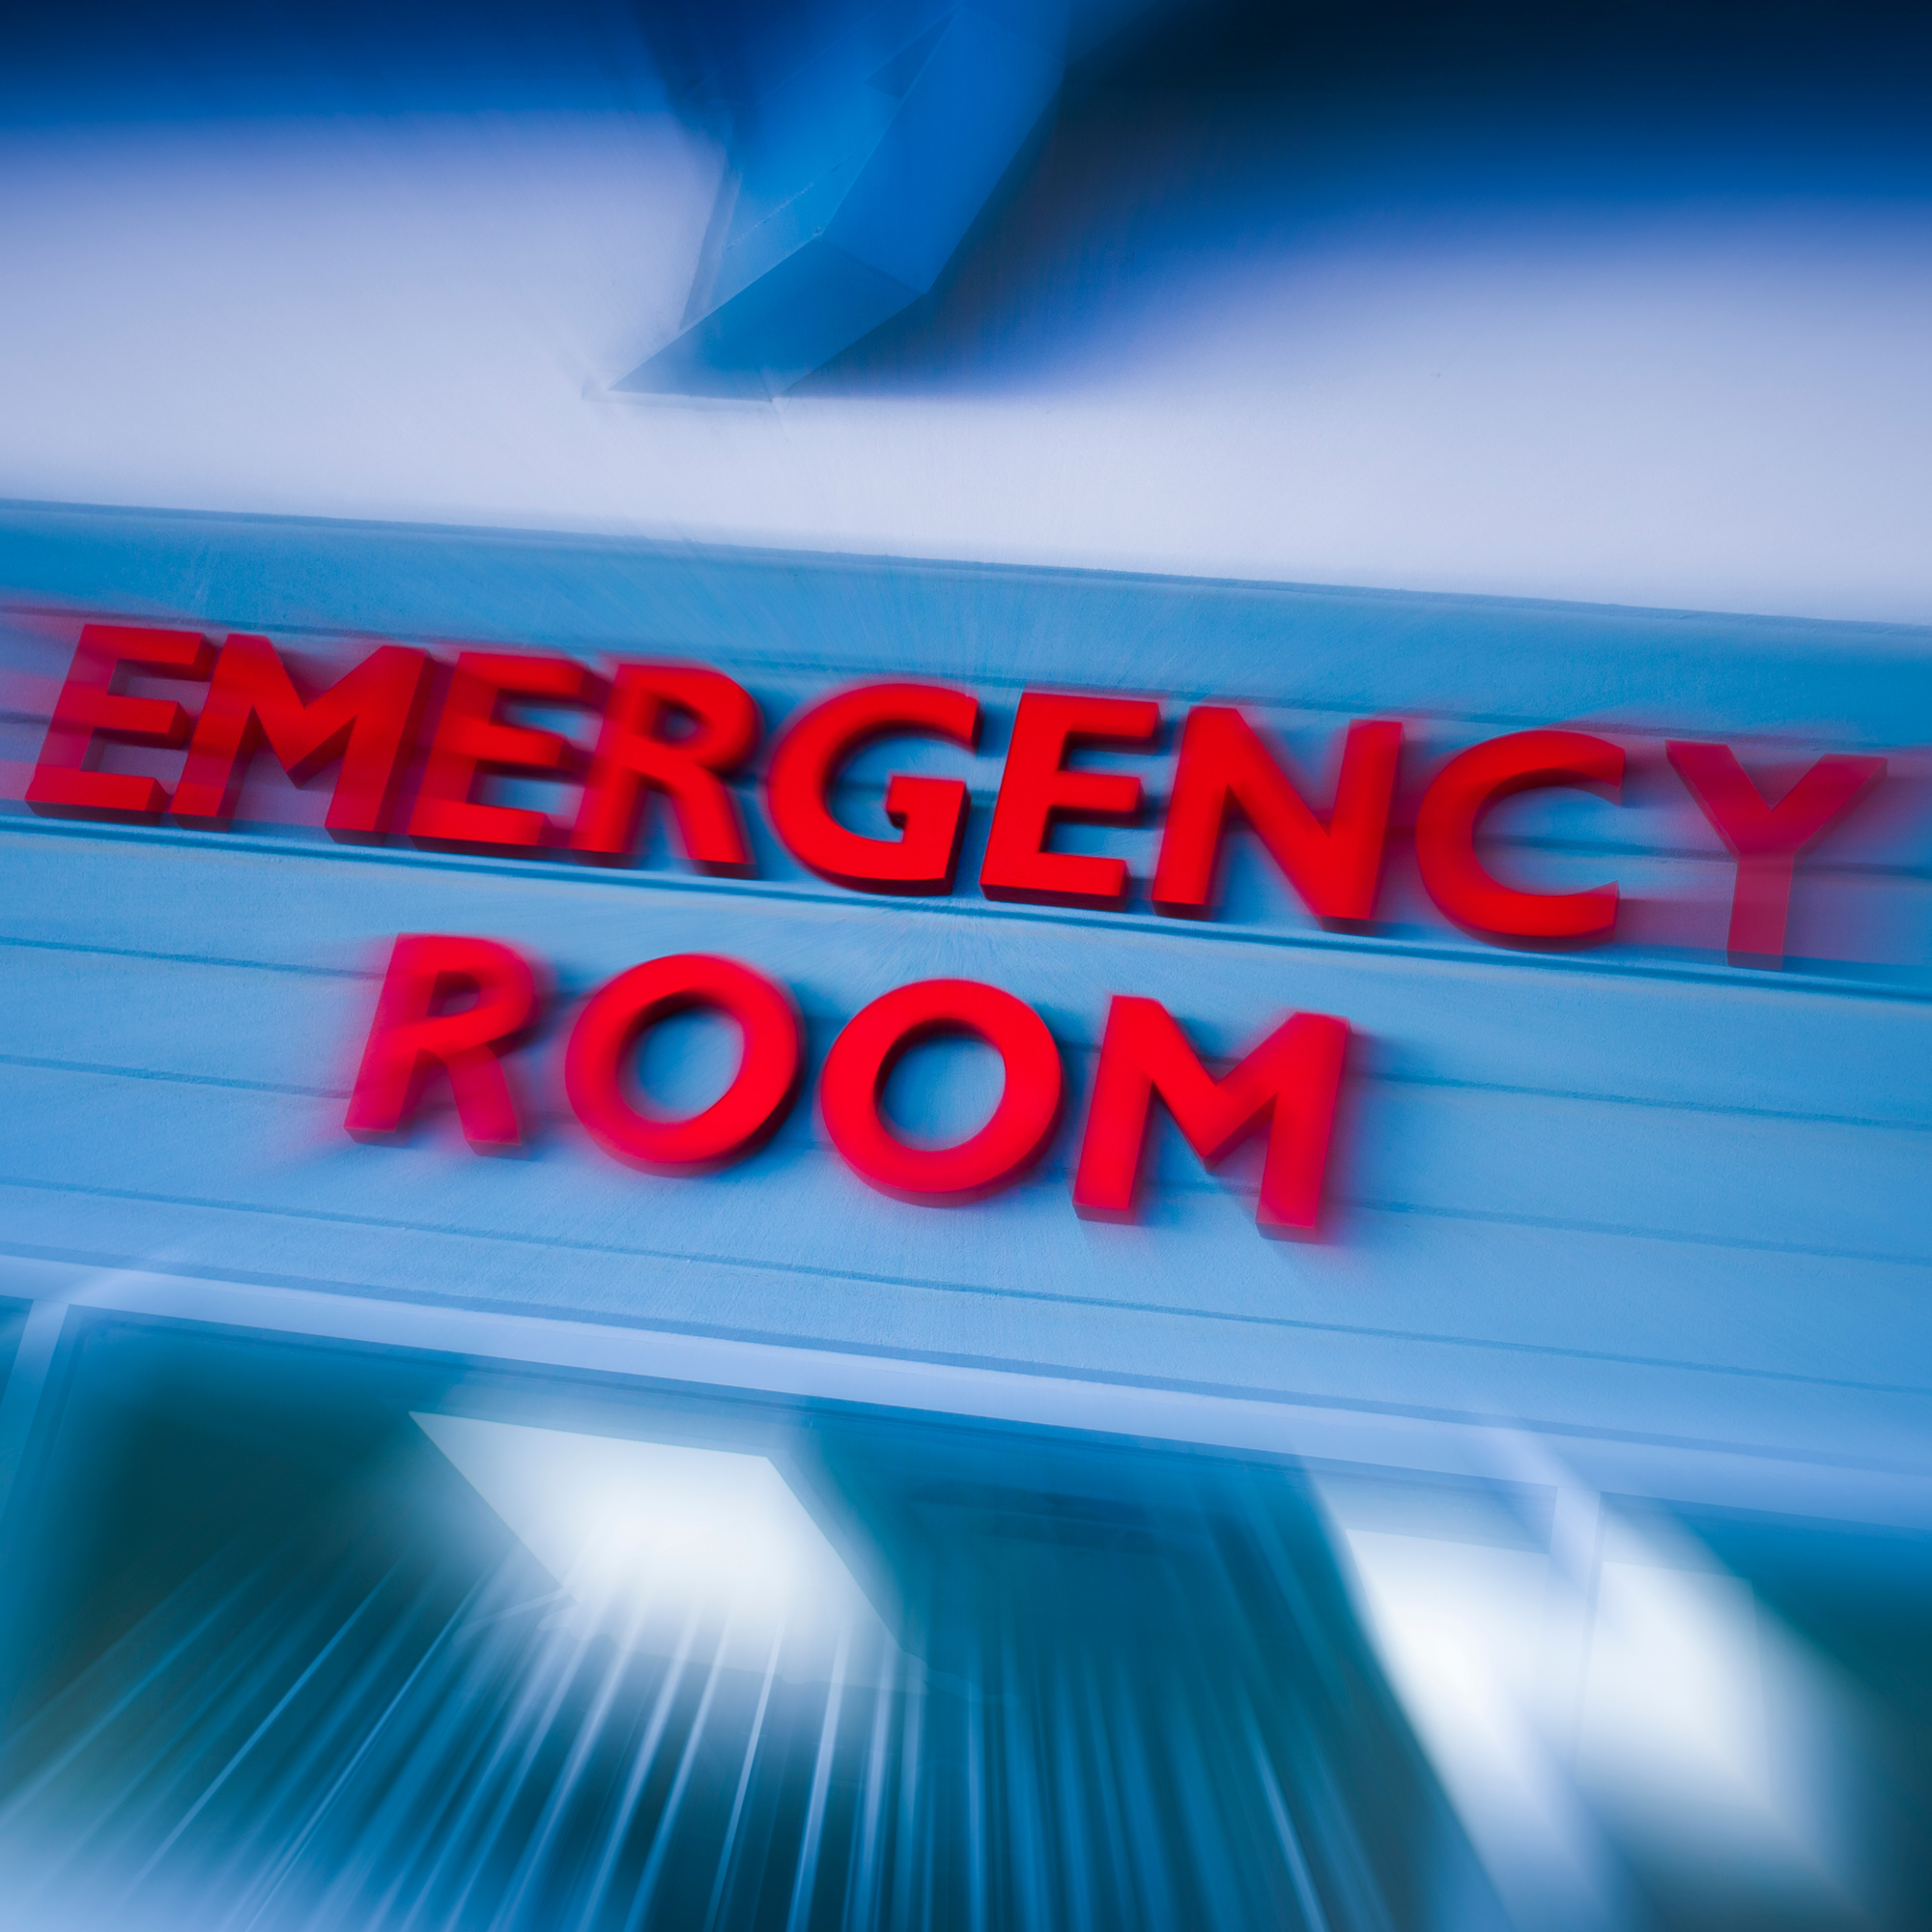 Blurred photo of an emergency room sign (red letters on a blue background)